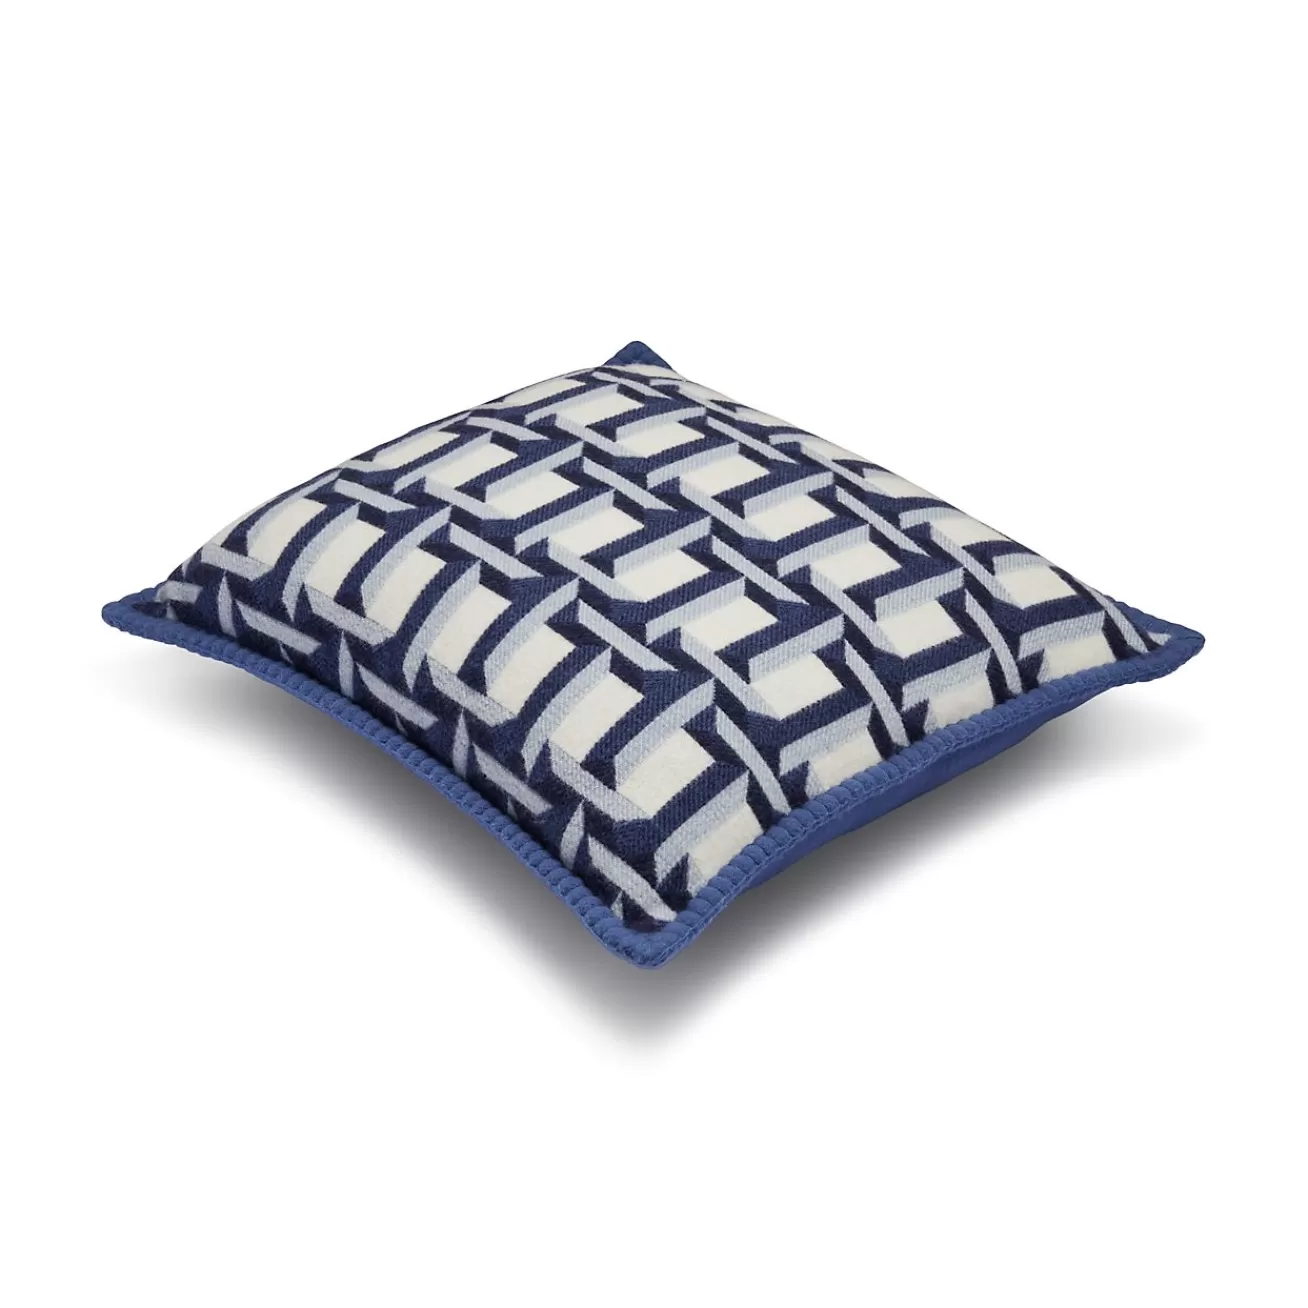 Tiffany & Co. Tiffany T True Cushion in Tanzanite-colored Wool and Cashmere | ^ The Home | Housewarming Gifts